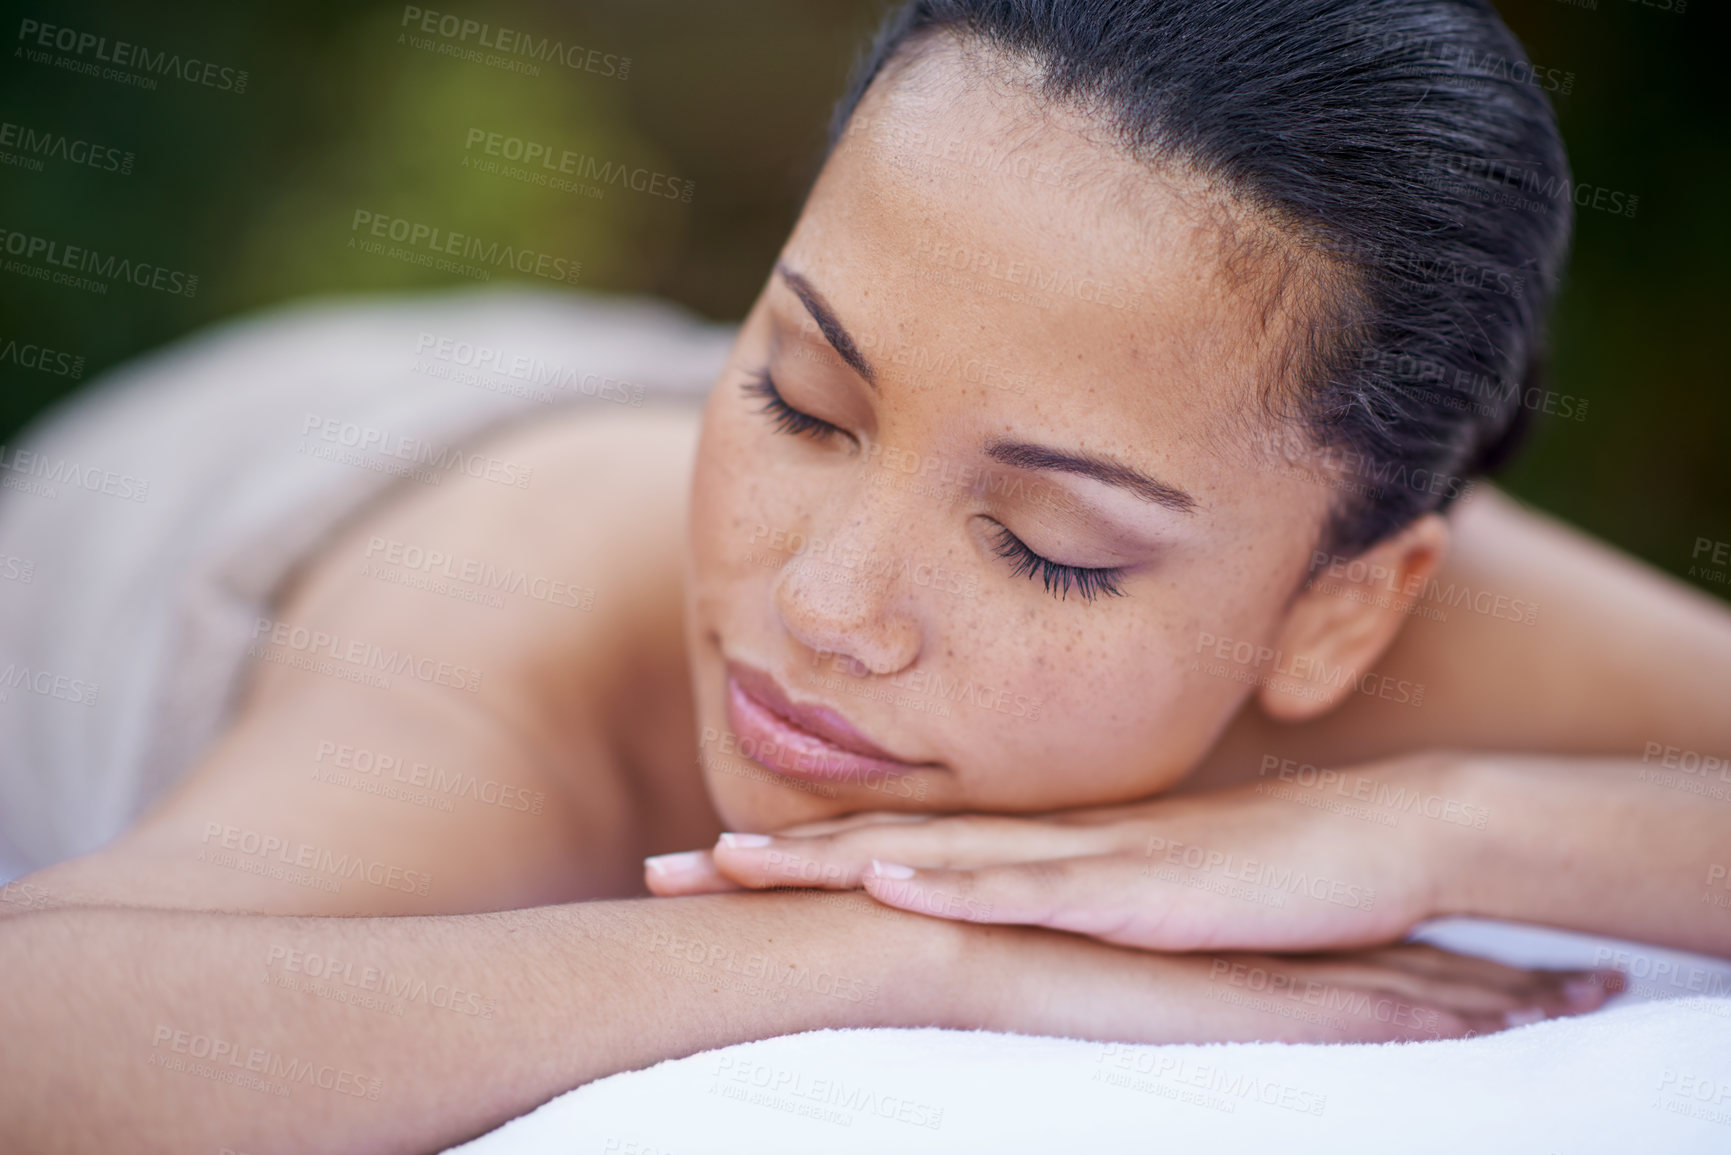 Buy stock photo Sleep, relax and a woman on a spa bed for a massage, luxury relaxation and wellbeing in nature. Relax, calm and a young lady sleeping after a skin treatment, pampering and wellness in a garden